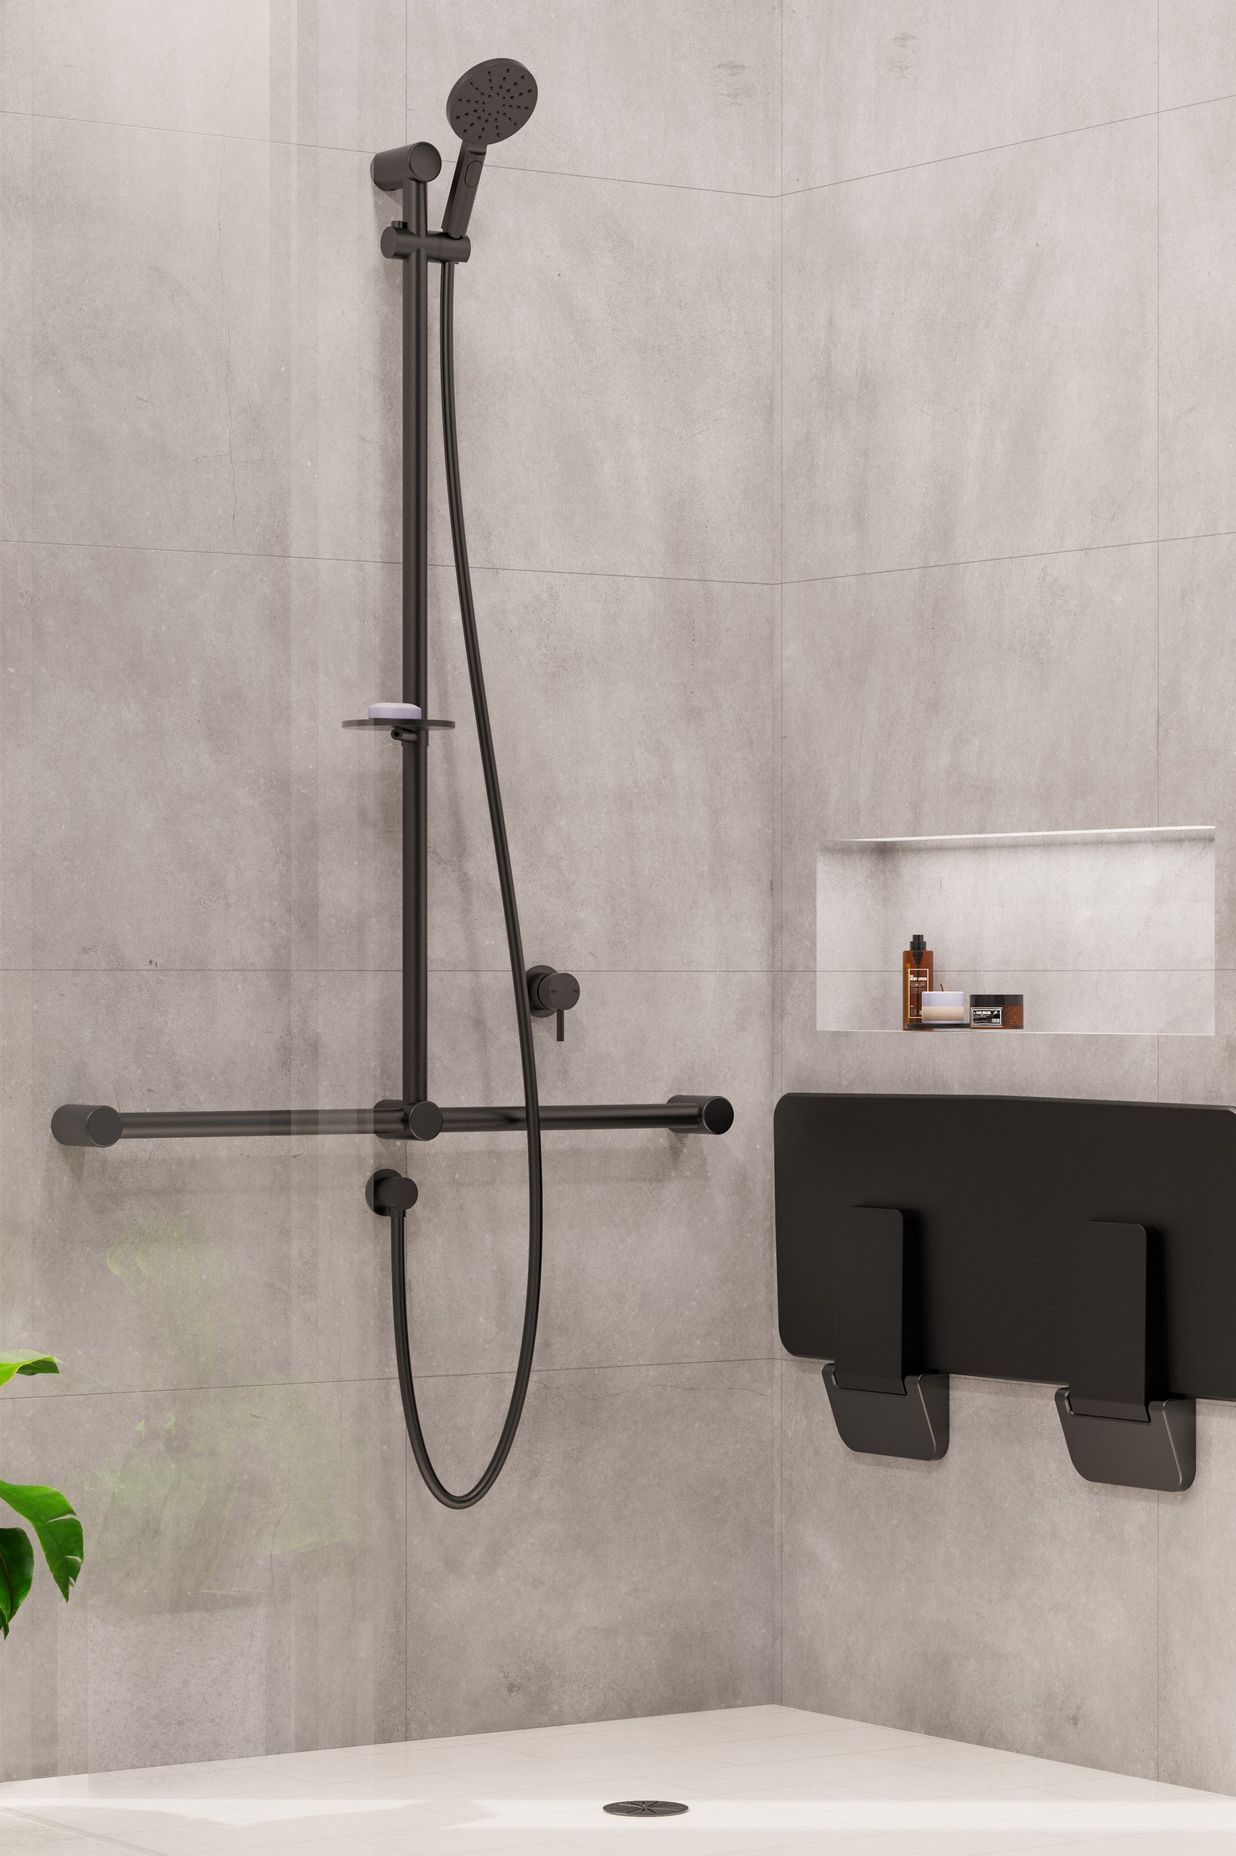 The Calibre Shower Rail by Avail Design has a responsive design and is available in stylish PVD finishes.